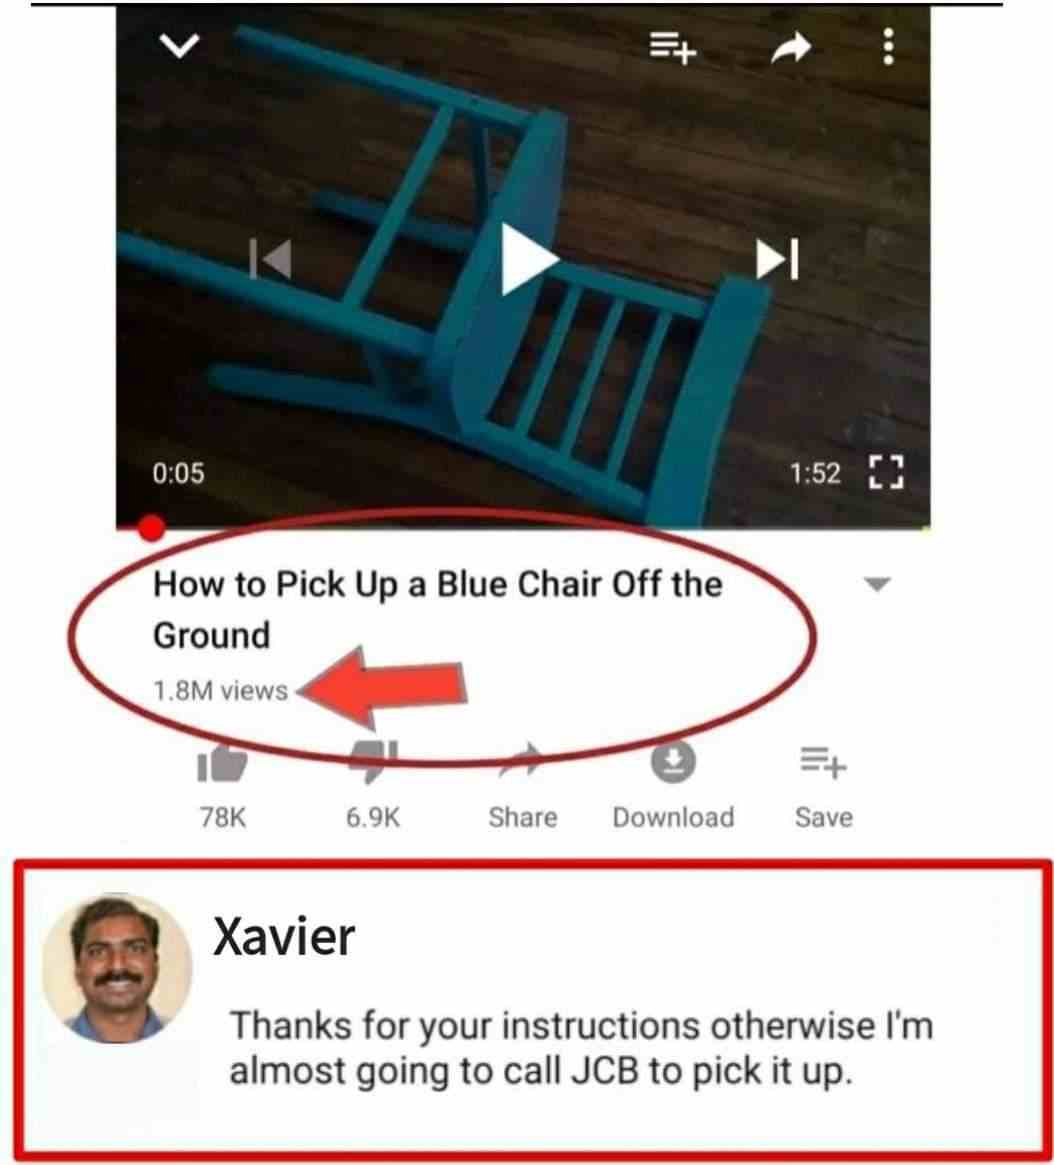 How to Pick Up a Blue Chair Off the Ground